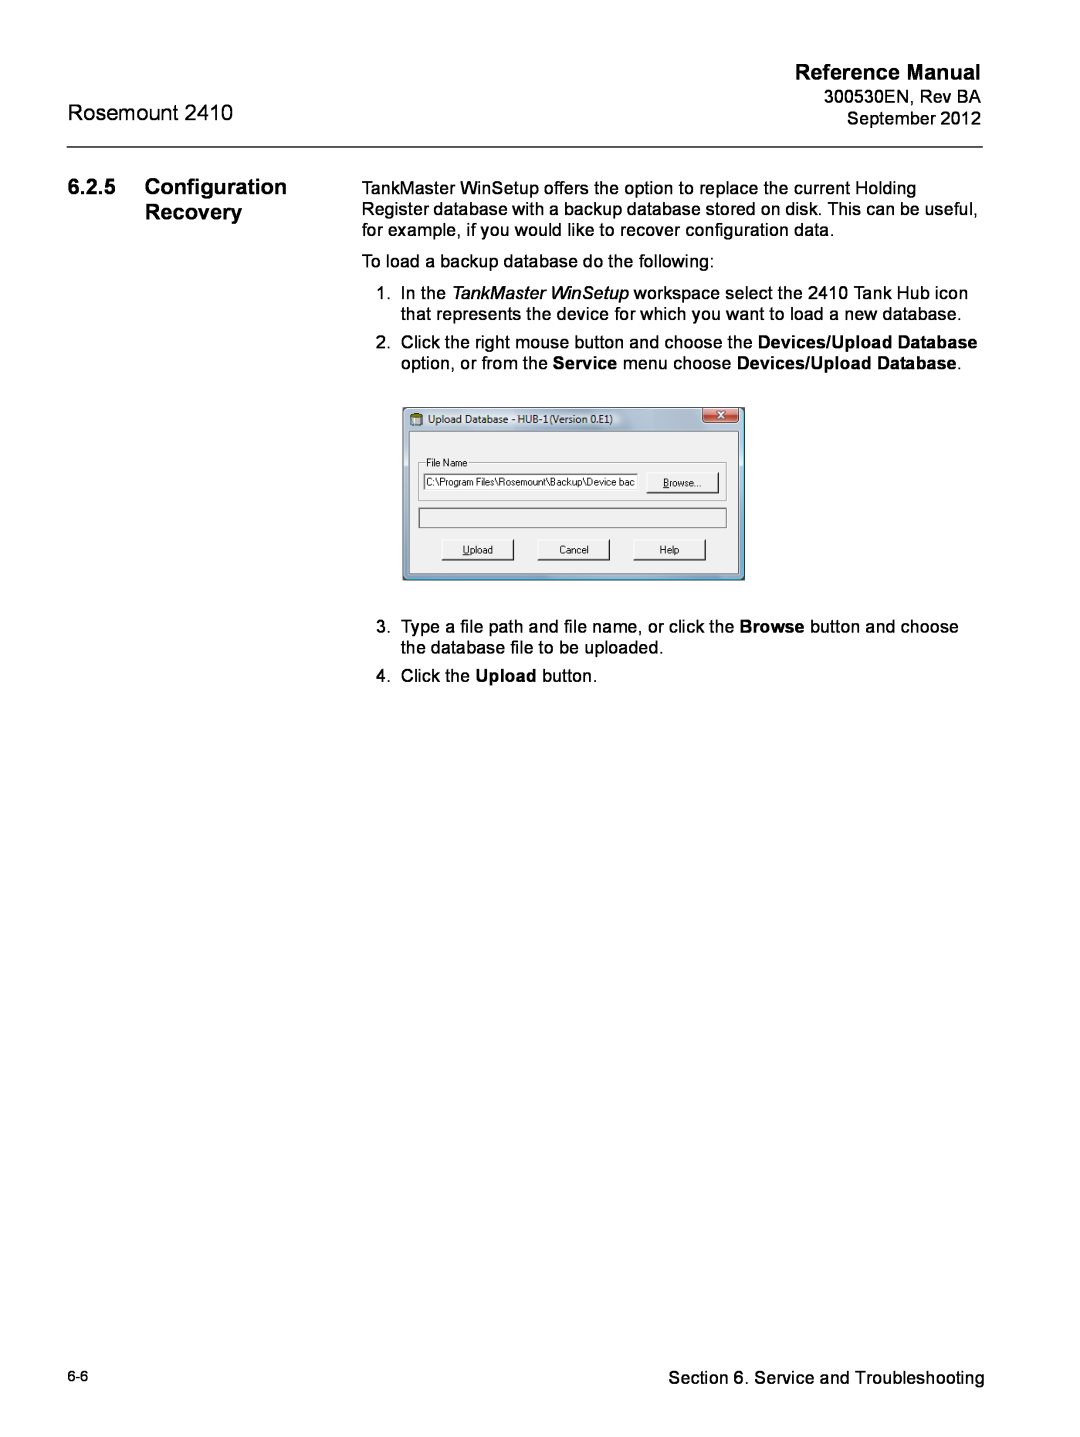 Emerson Process Management Rosemount 2410 manual Configuration Recovery, Reference Manual 